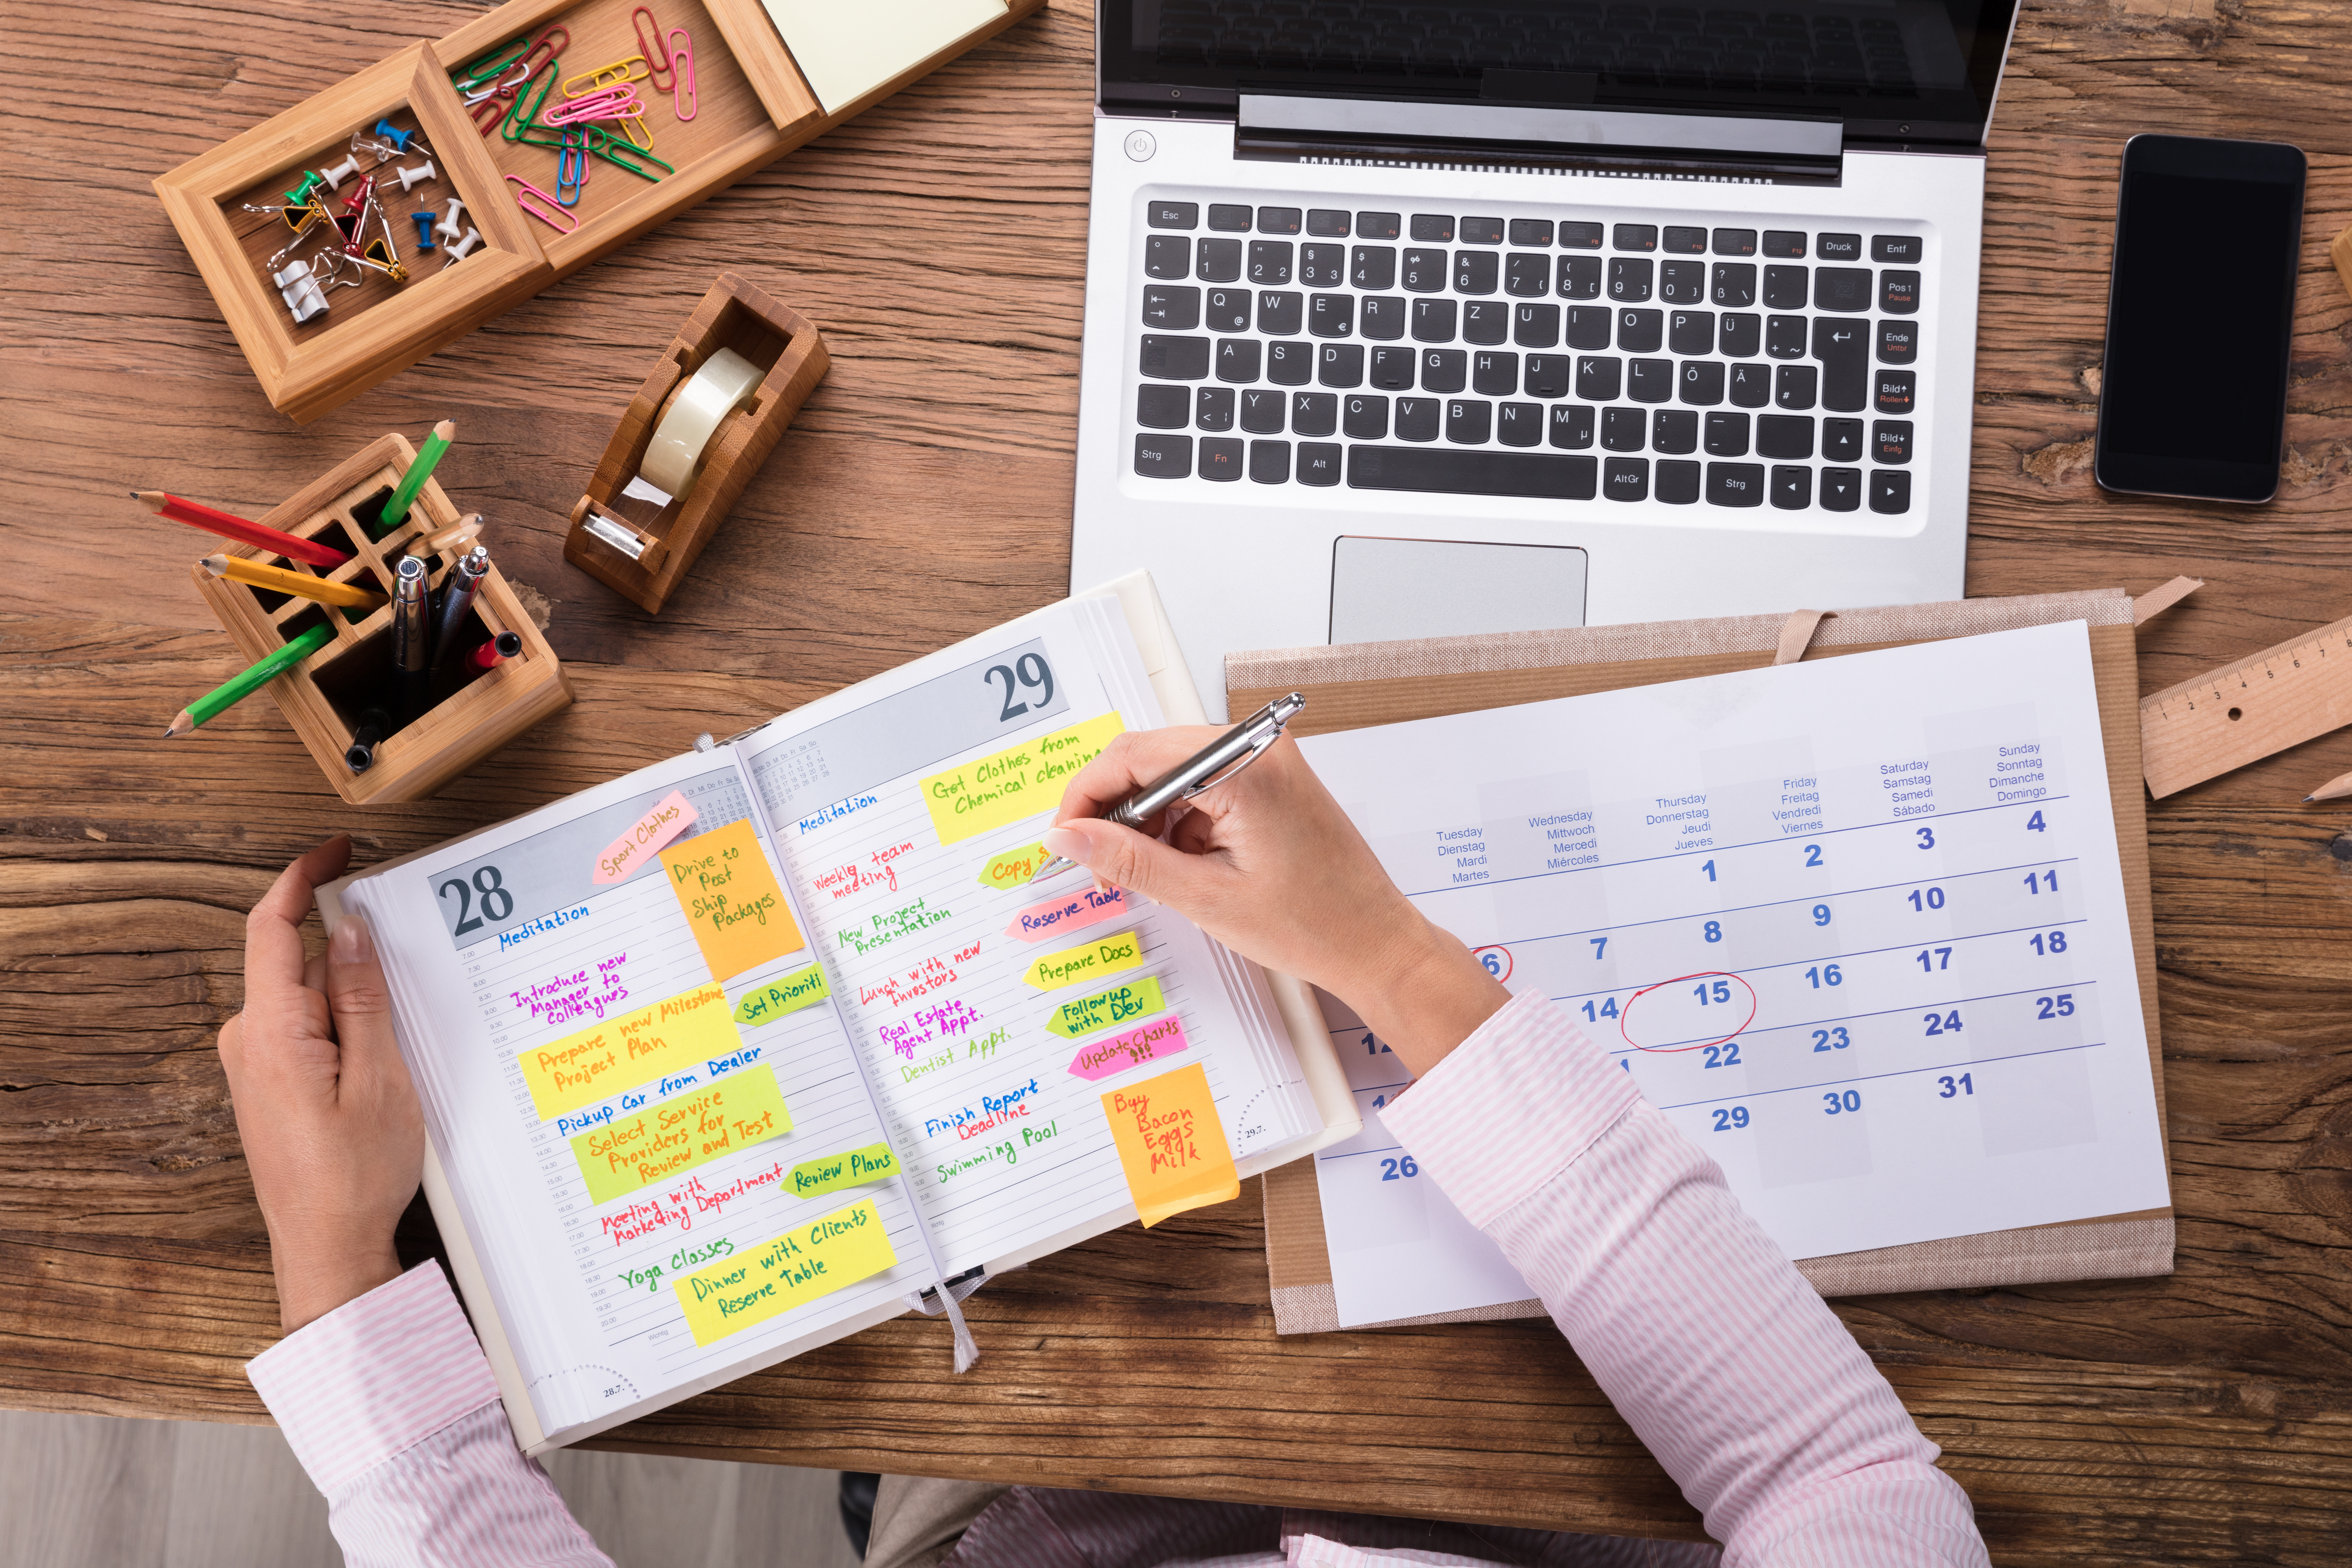 A person sits at a desk, planning their schedule in an organizer and calendar.